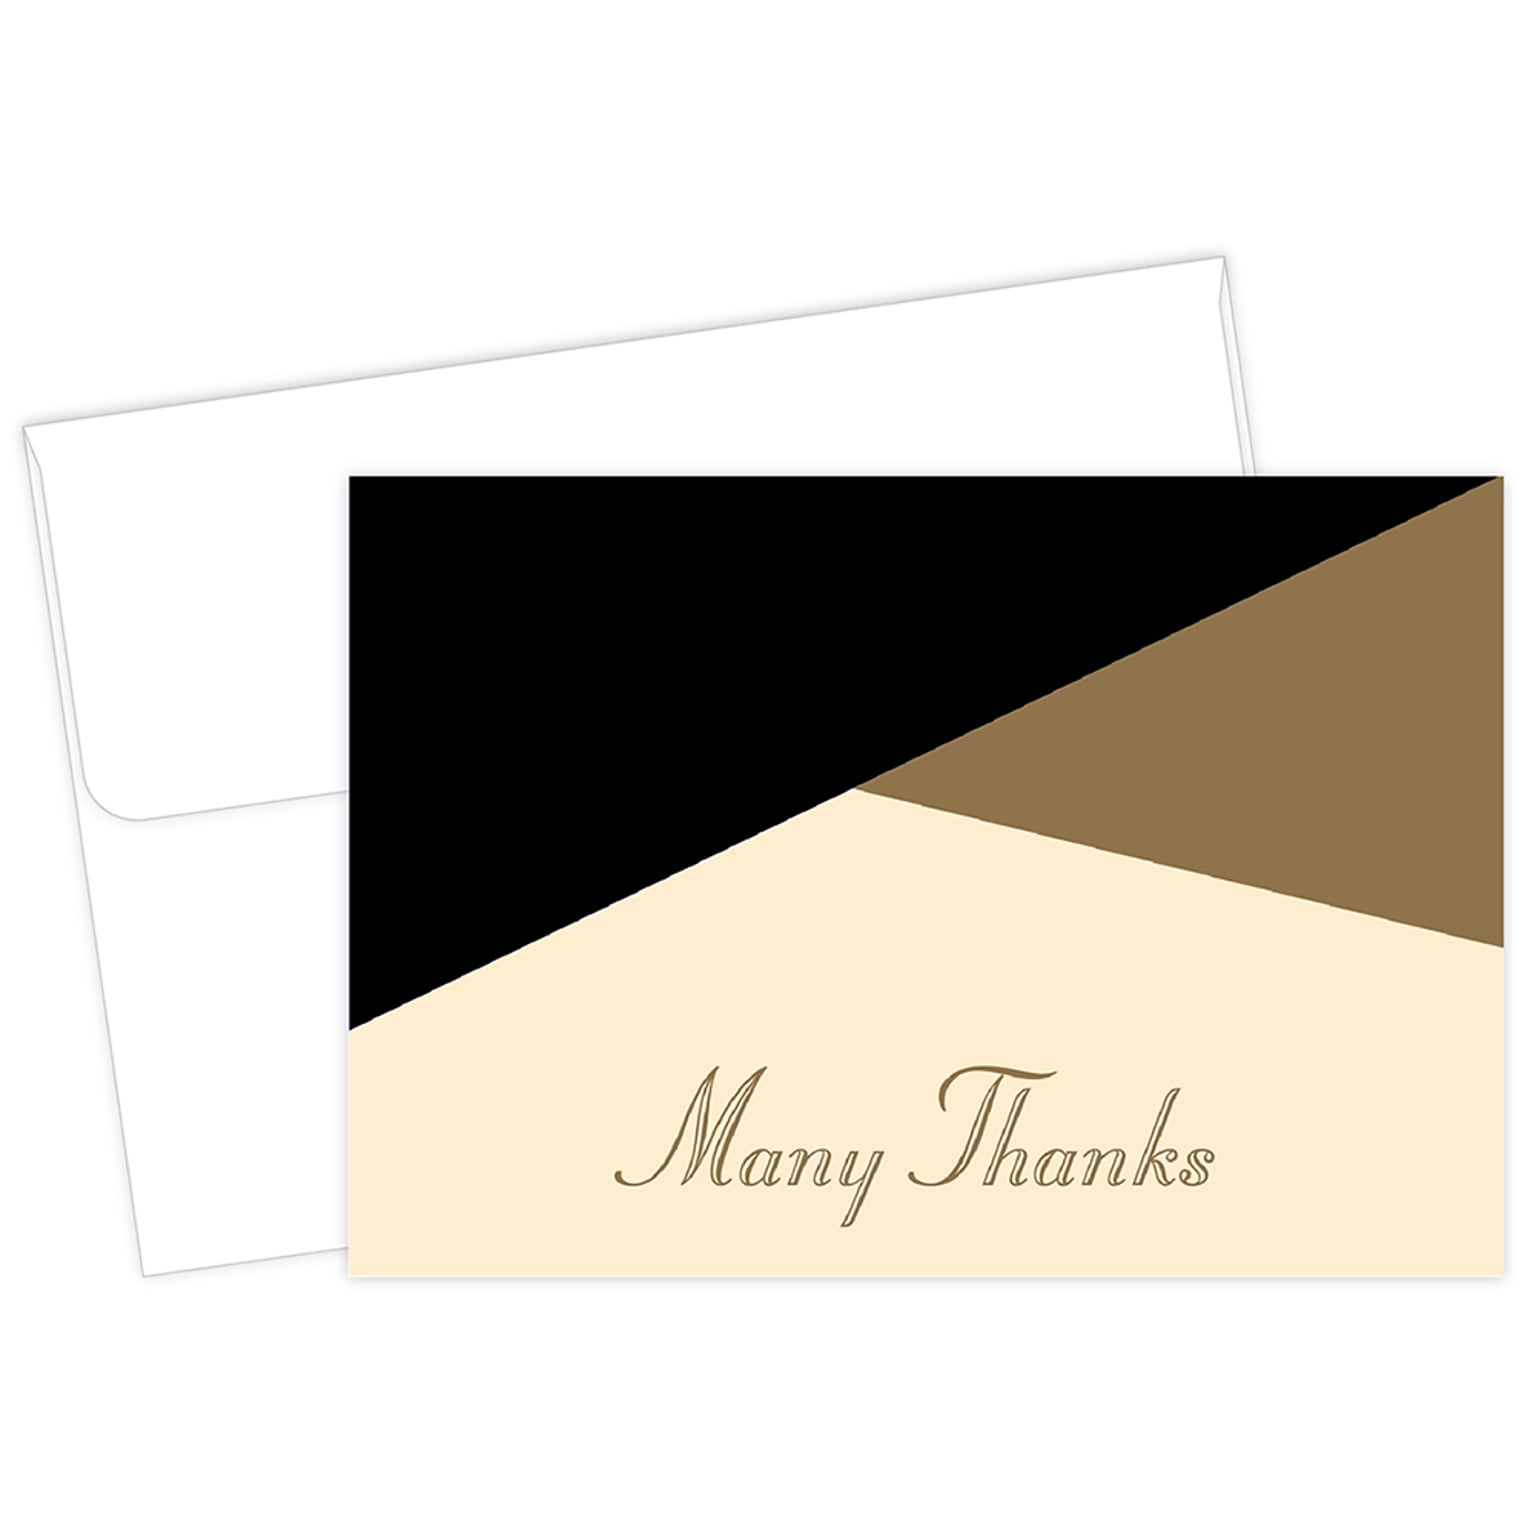 Masterpiece Studios Great Papers!® Missing Pieces with Gold Metallic Thank You Note Card, 4.875H x 3.35W, 50 count (2017055)